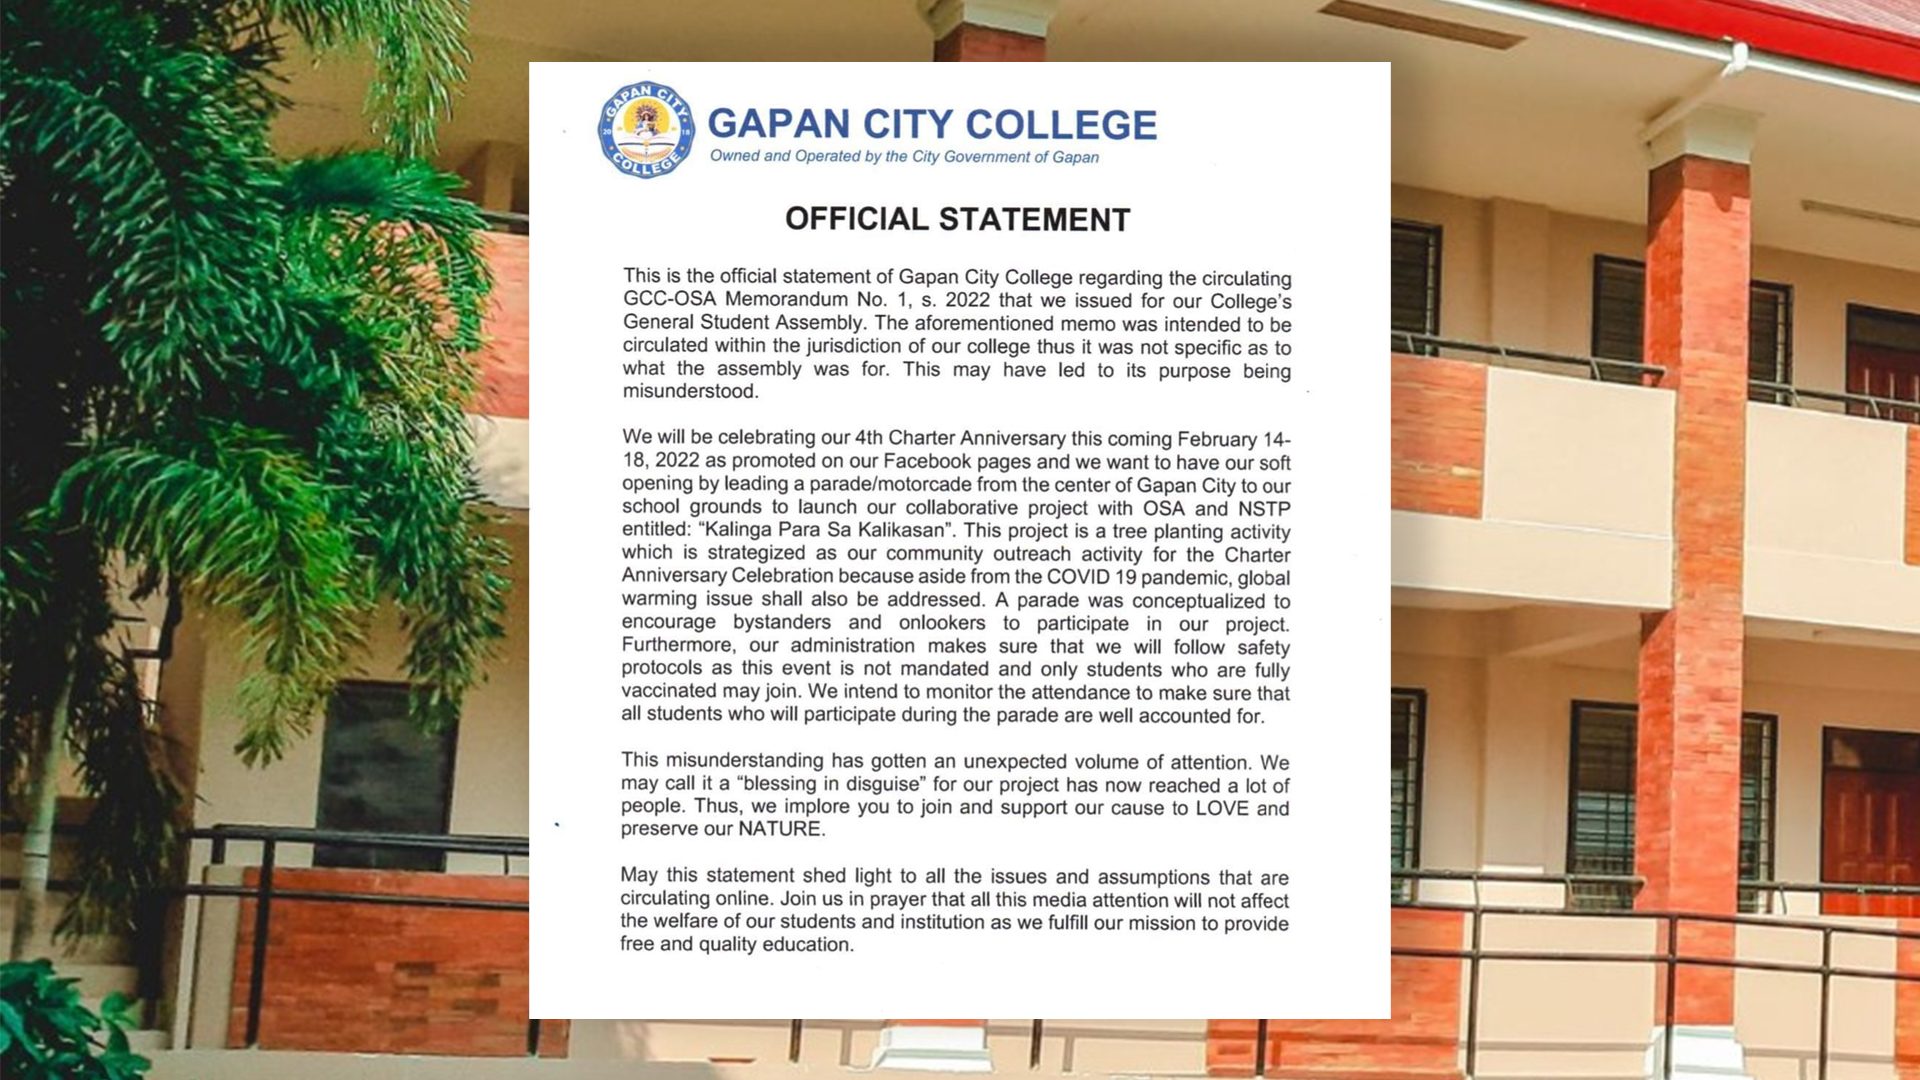 Gapan City College says red-green theme for anniversary soft launch ‘misunderstood’